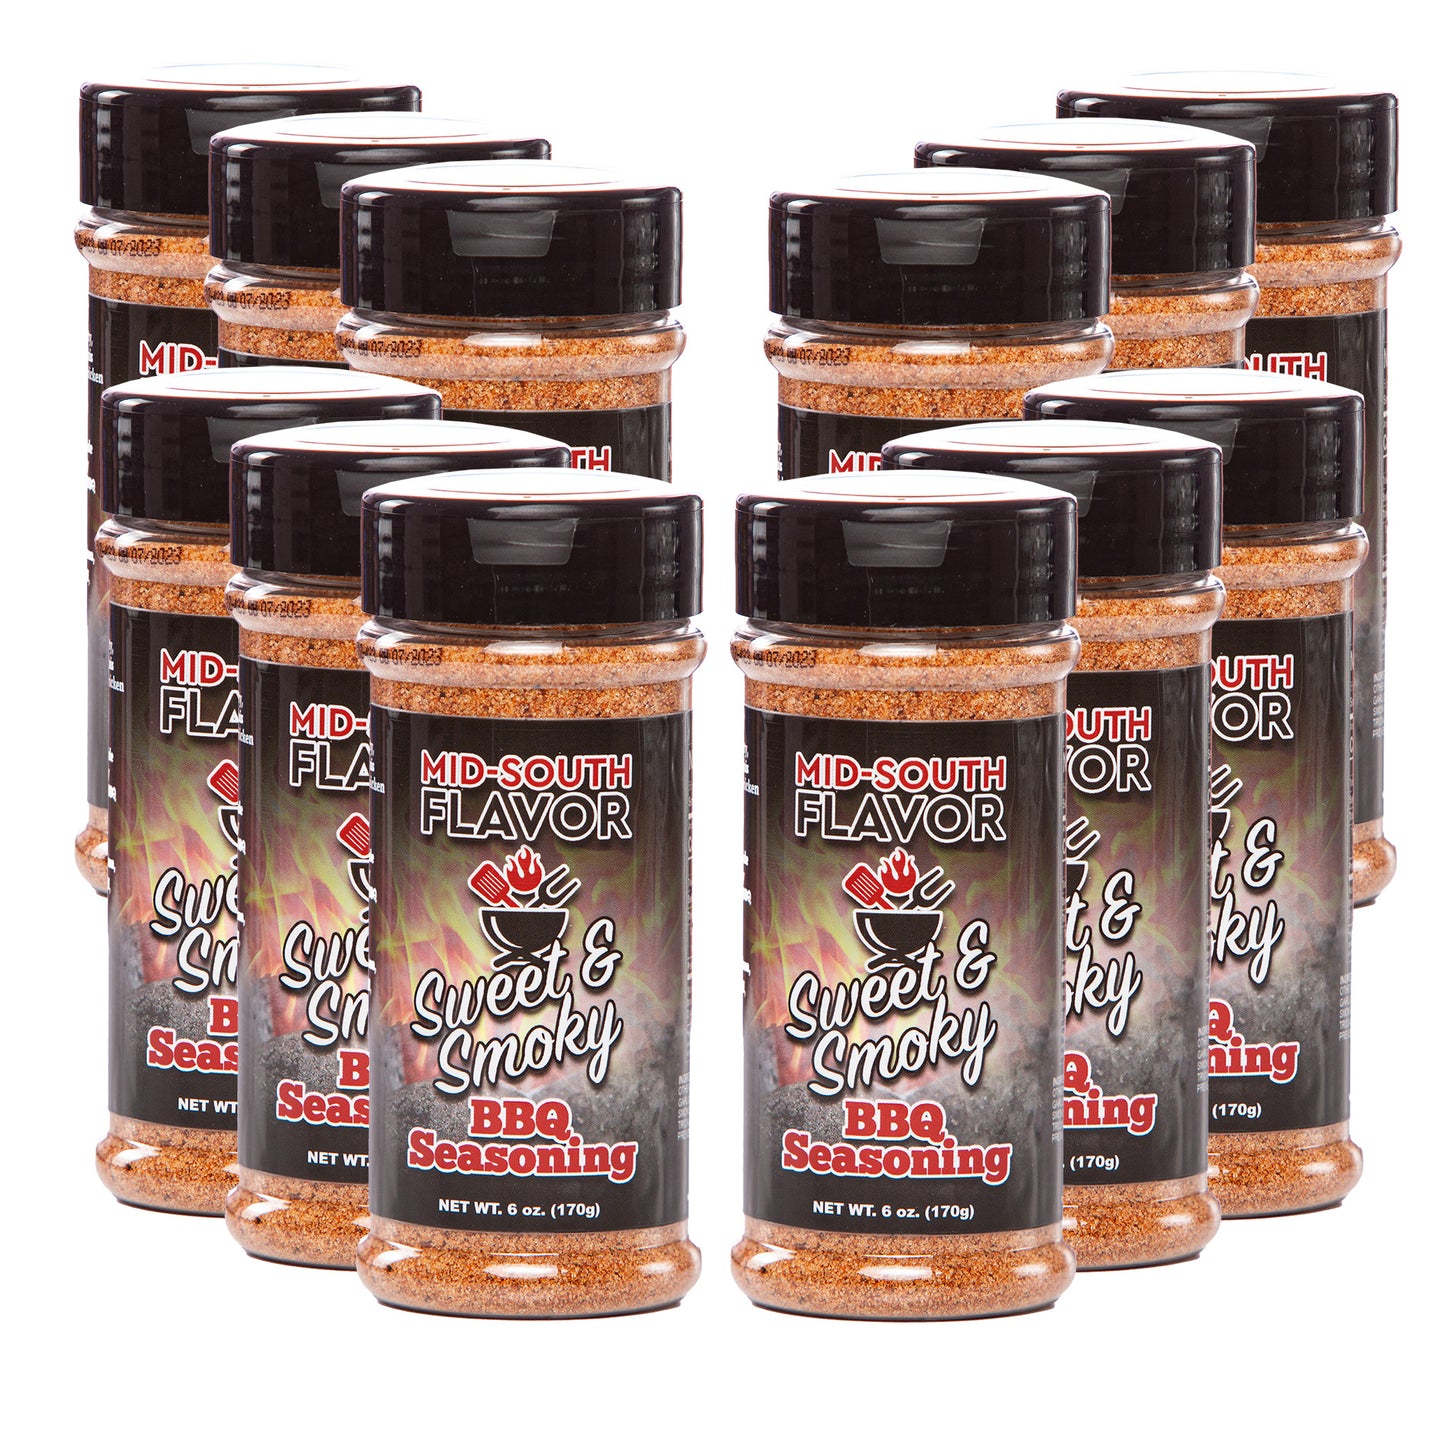 MID-SOUTH FLAVOR Sweet and Smoky BBQ Seasoning, 6 oz Bottle of BBQ Rub for Use Indoor and Outdoor Grilling